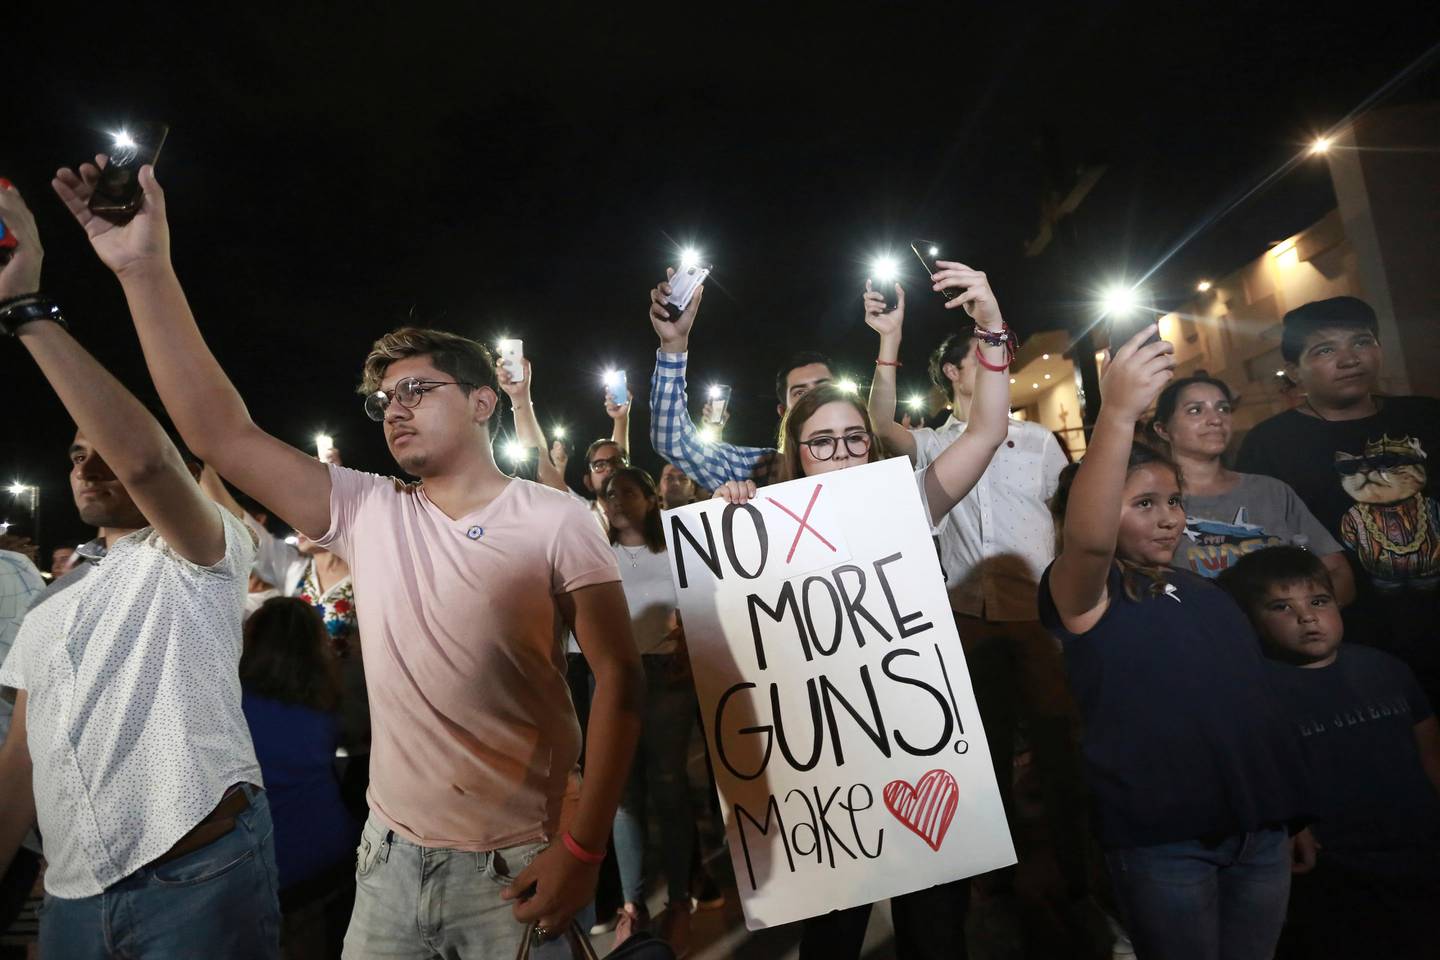 People gather in Juarez, Mexico, Saturday, Aug. 3, 2019, in a vigil for the 3 Mexican nationals who were killed in an El Paso shopping-complex shooting. Twenty people were killed and more than two dozen injured in a shooting Saturday in a busy shopping area in the Texas border town of El Paso, the stateÄôs governor said. (AP Photo/Christian Chavez)